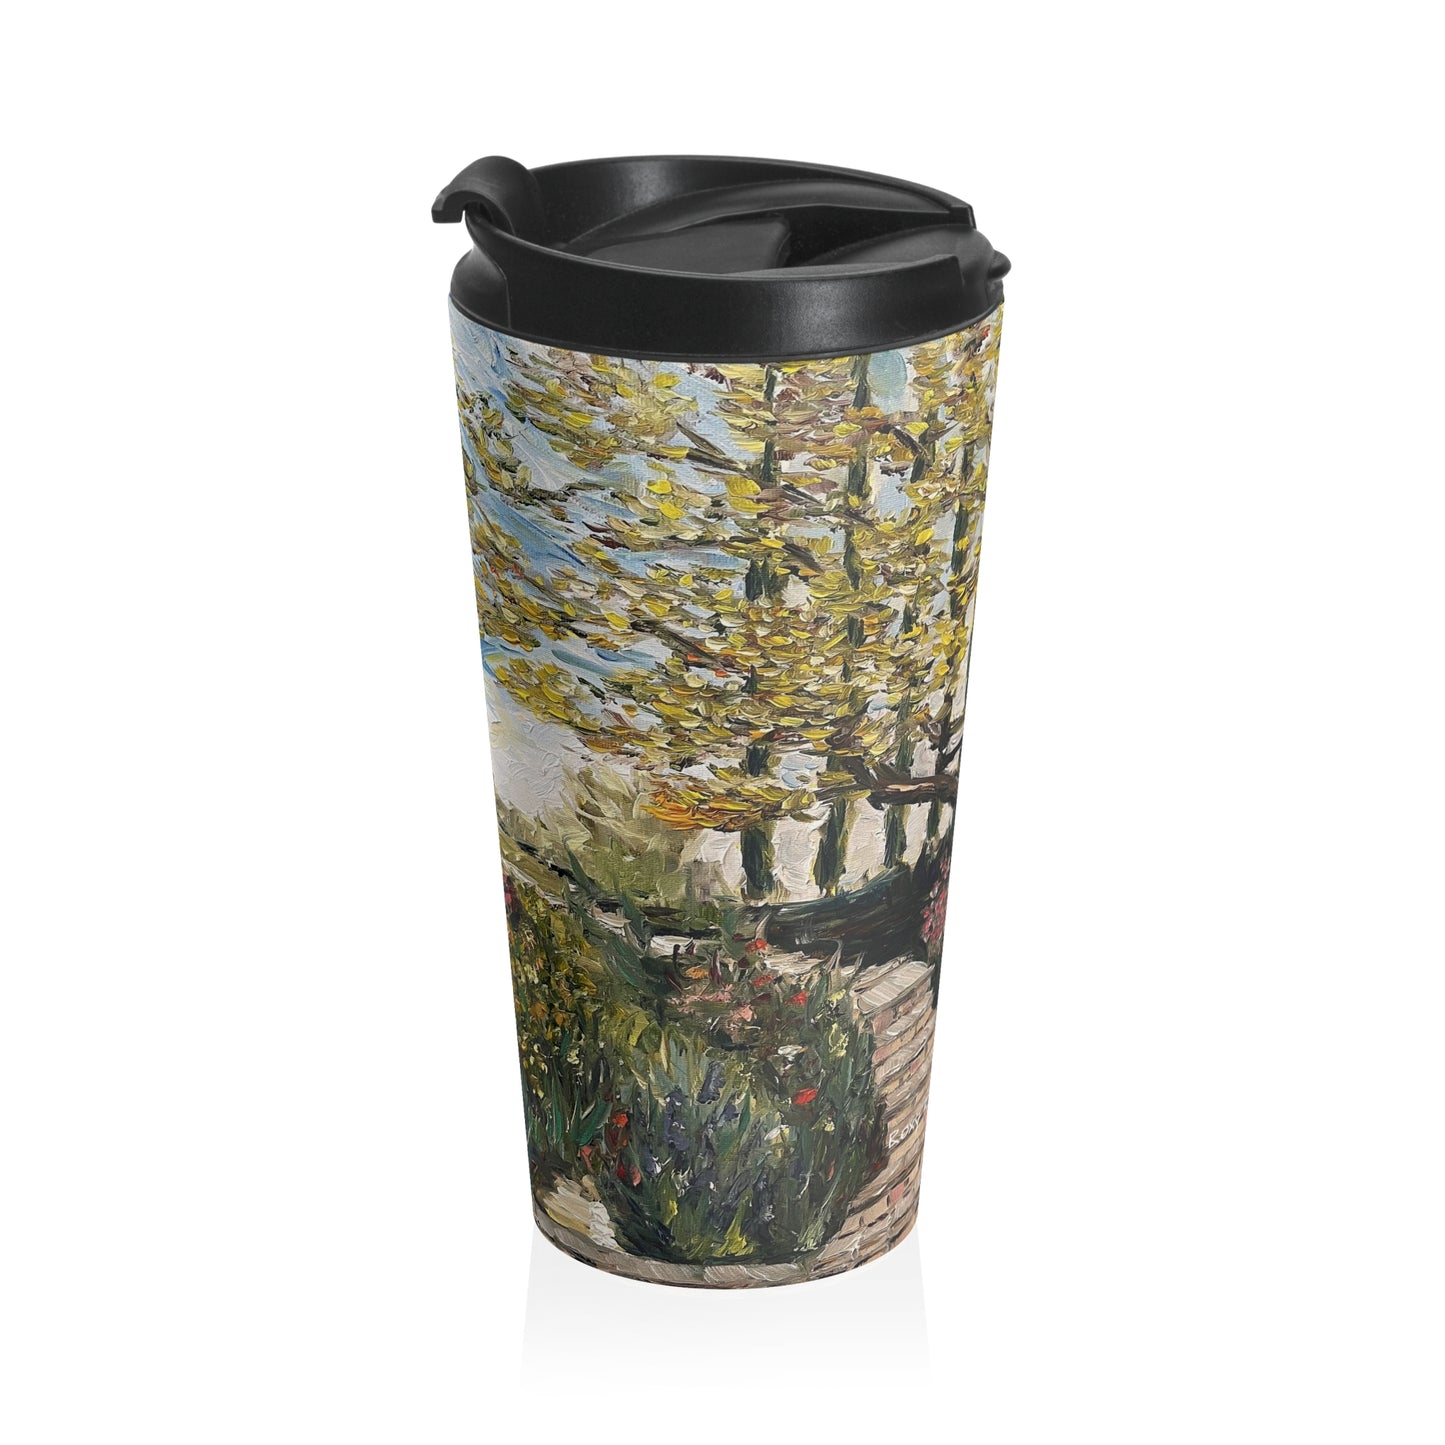 Olive Tree and Garden at GBV Temecula Stainless Steel Travel Mug